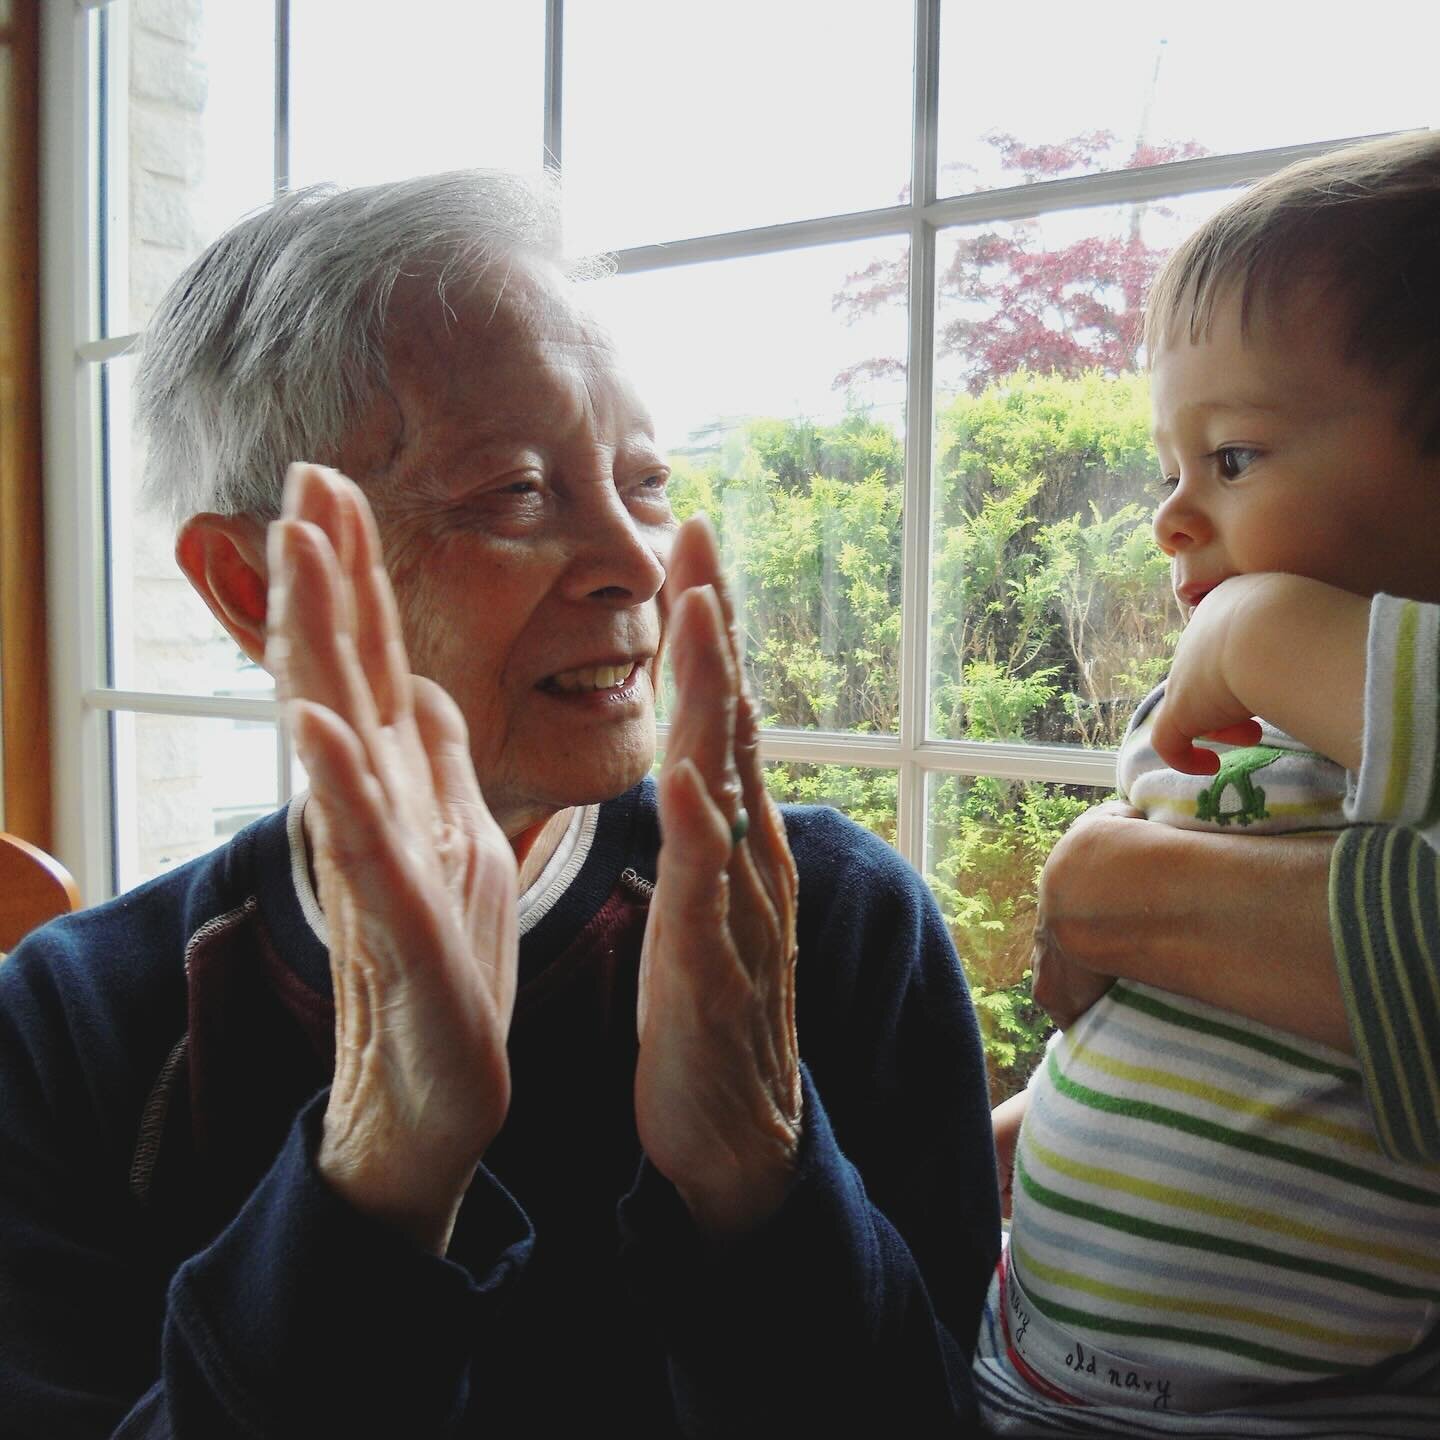 What a life. My grandfather, Suey Lin Dong, died early this morning in hospice care, surrounded by all his children. He was just shy of 102. He was born in rural China, fled the Communist revolution to Hong Kong, moved to NYC Chinatown, and worked fo